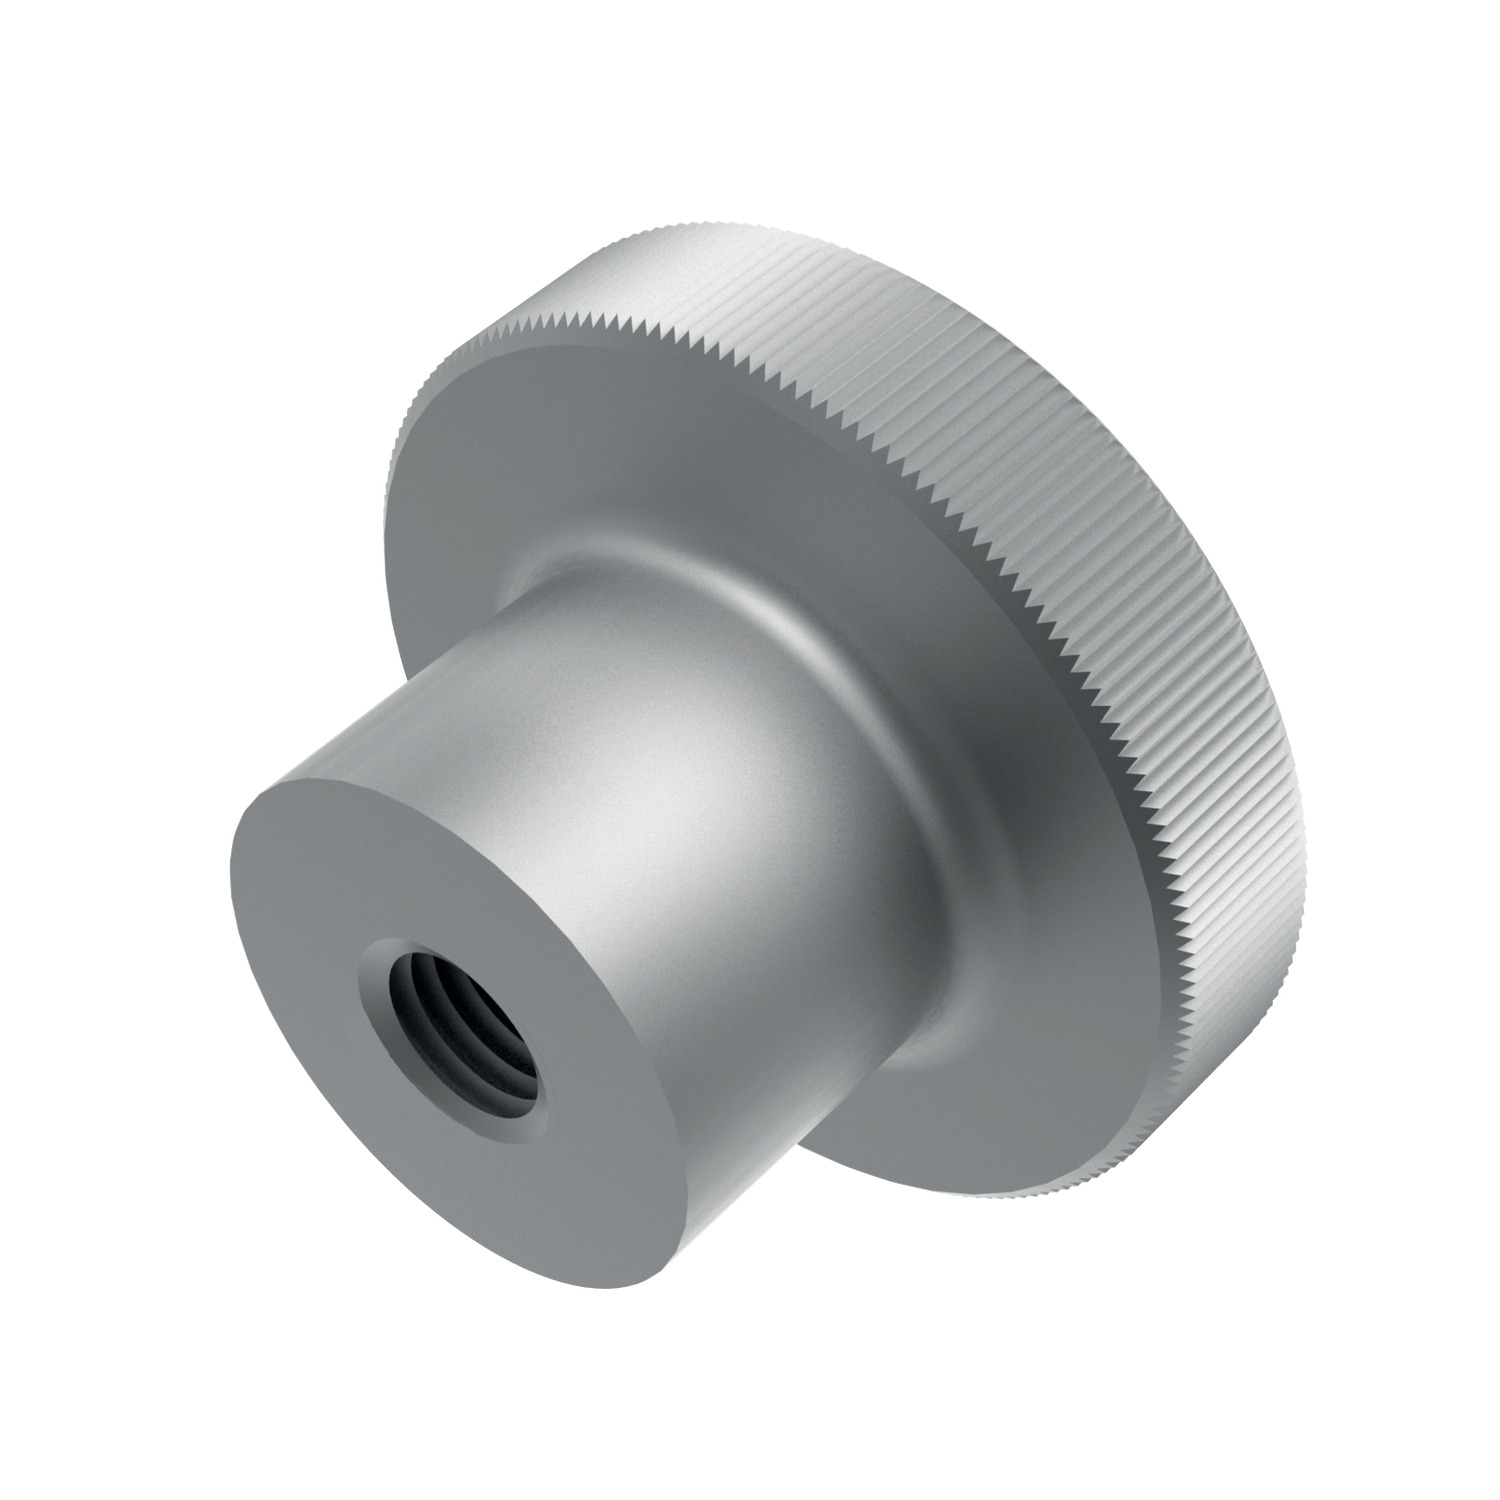 P0403.A4 Knurled Thumb Nuts